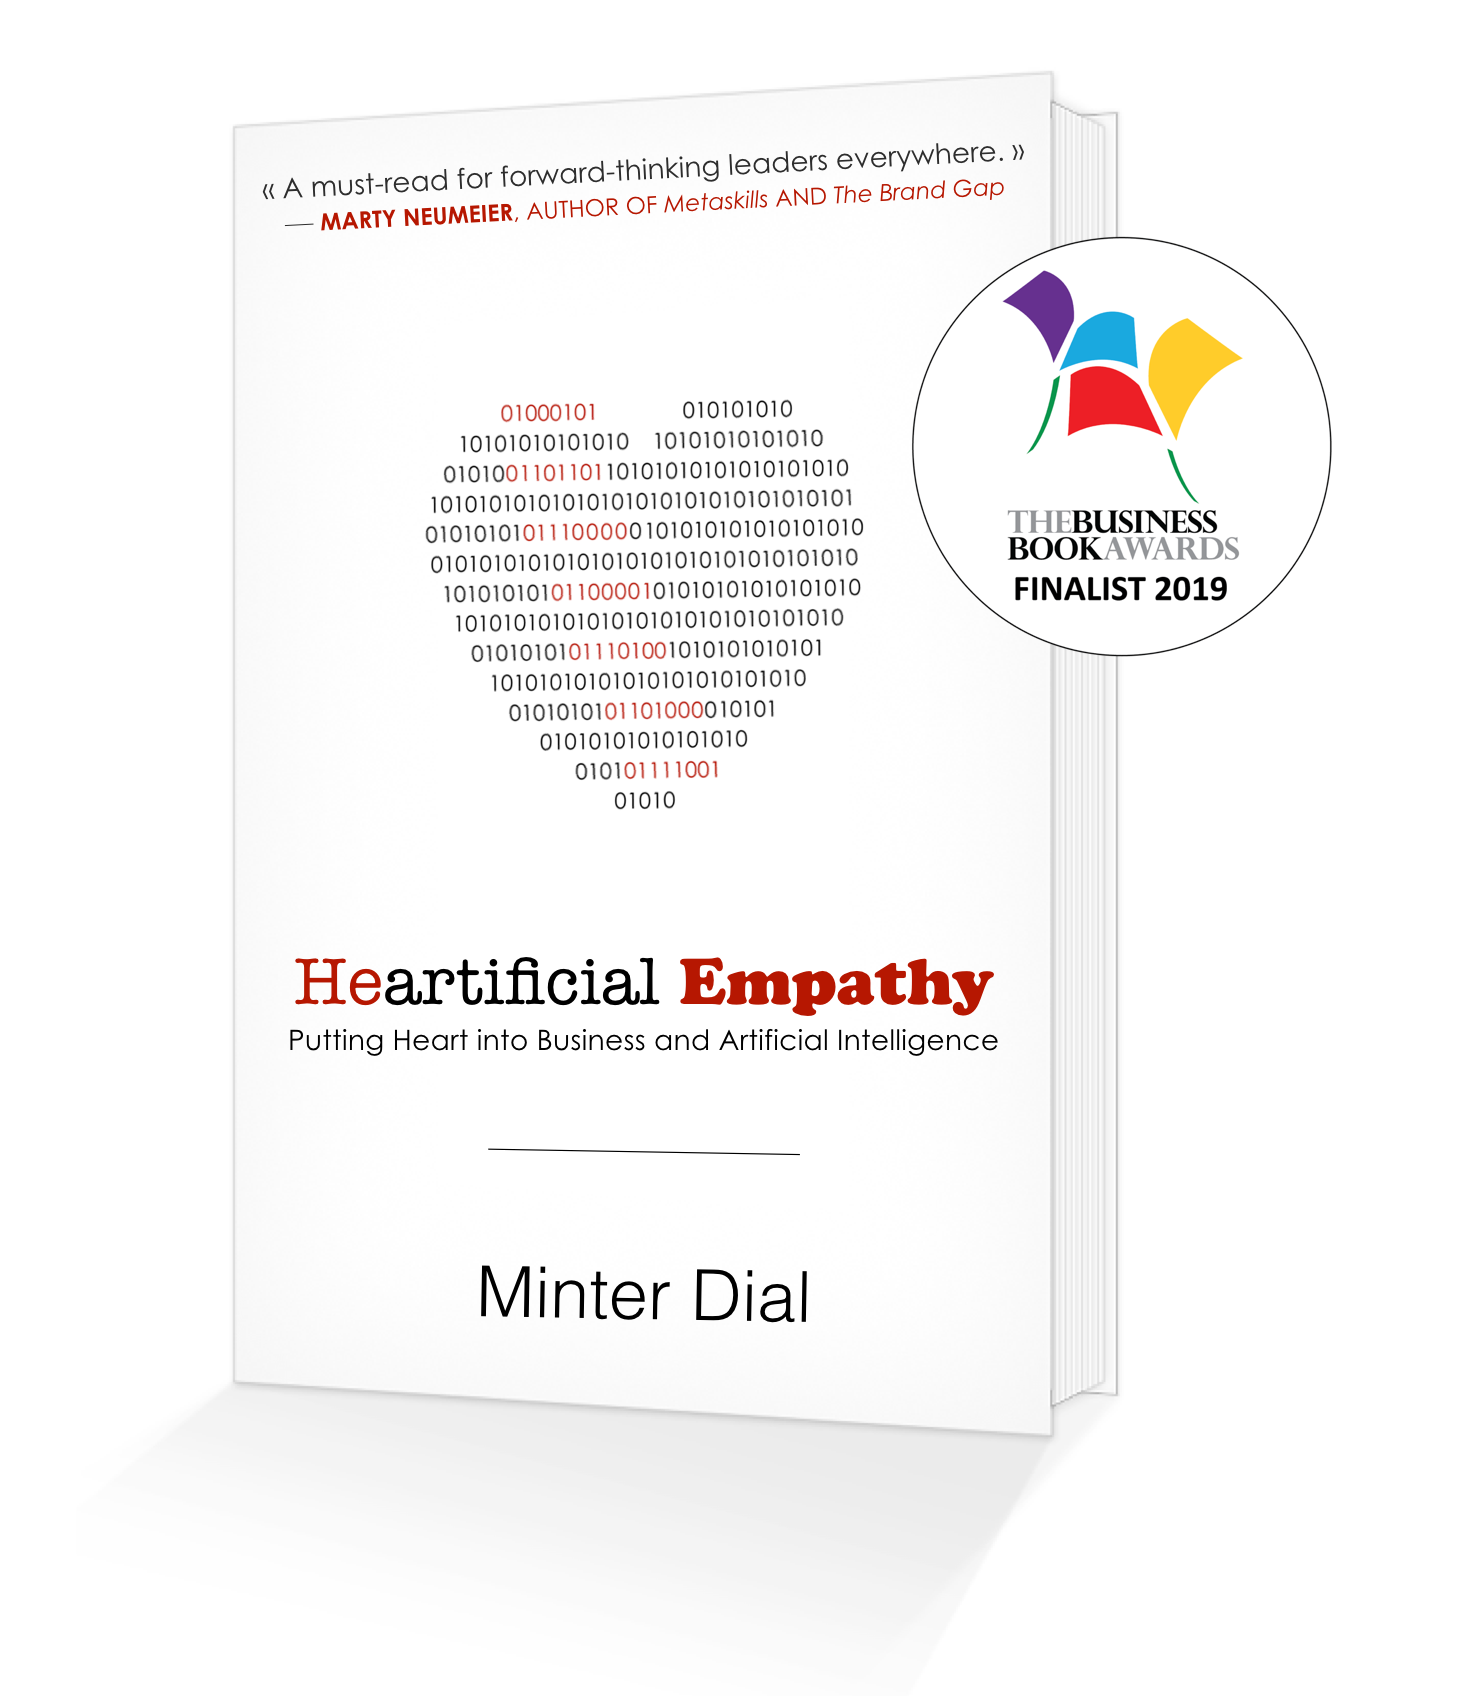 Front cover with book in 3D Heartificial Empathy with BBA 2019